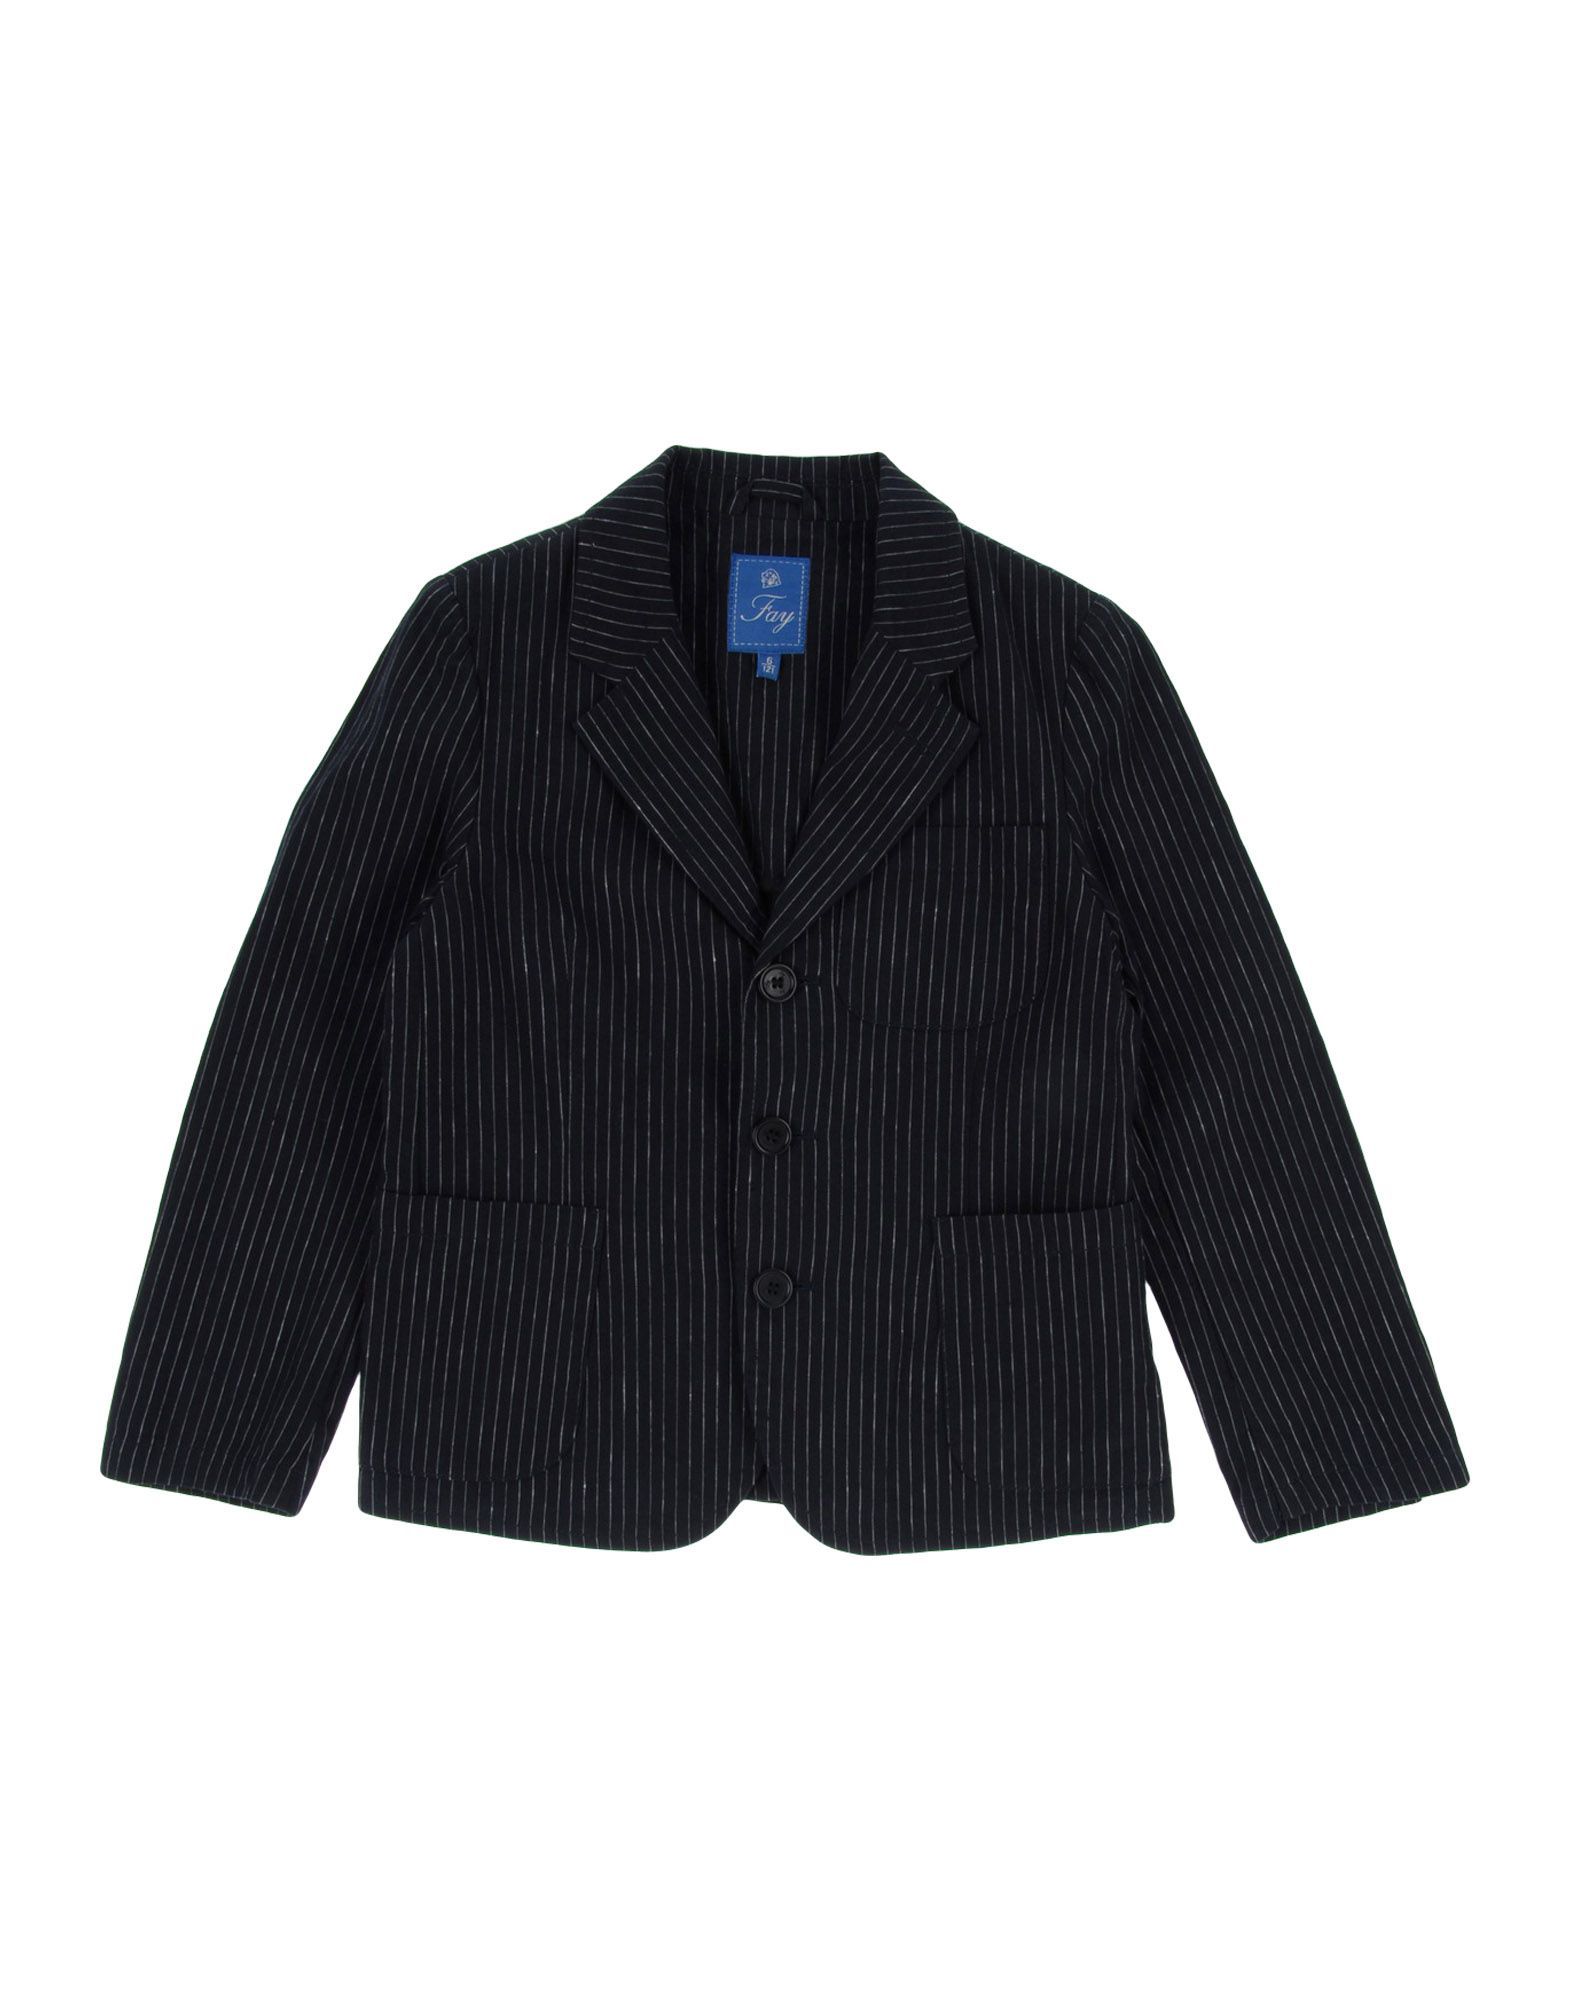 plain weave, darts, logo, pinstriped, multipockets, single chest pocket, 3 buttons, lapel collar, single-breasted , long sleeves, semi-lined, rear split, do not wash, dry cleanable, iron at 110° c max, do not bleach, do not tumble dry